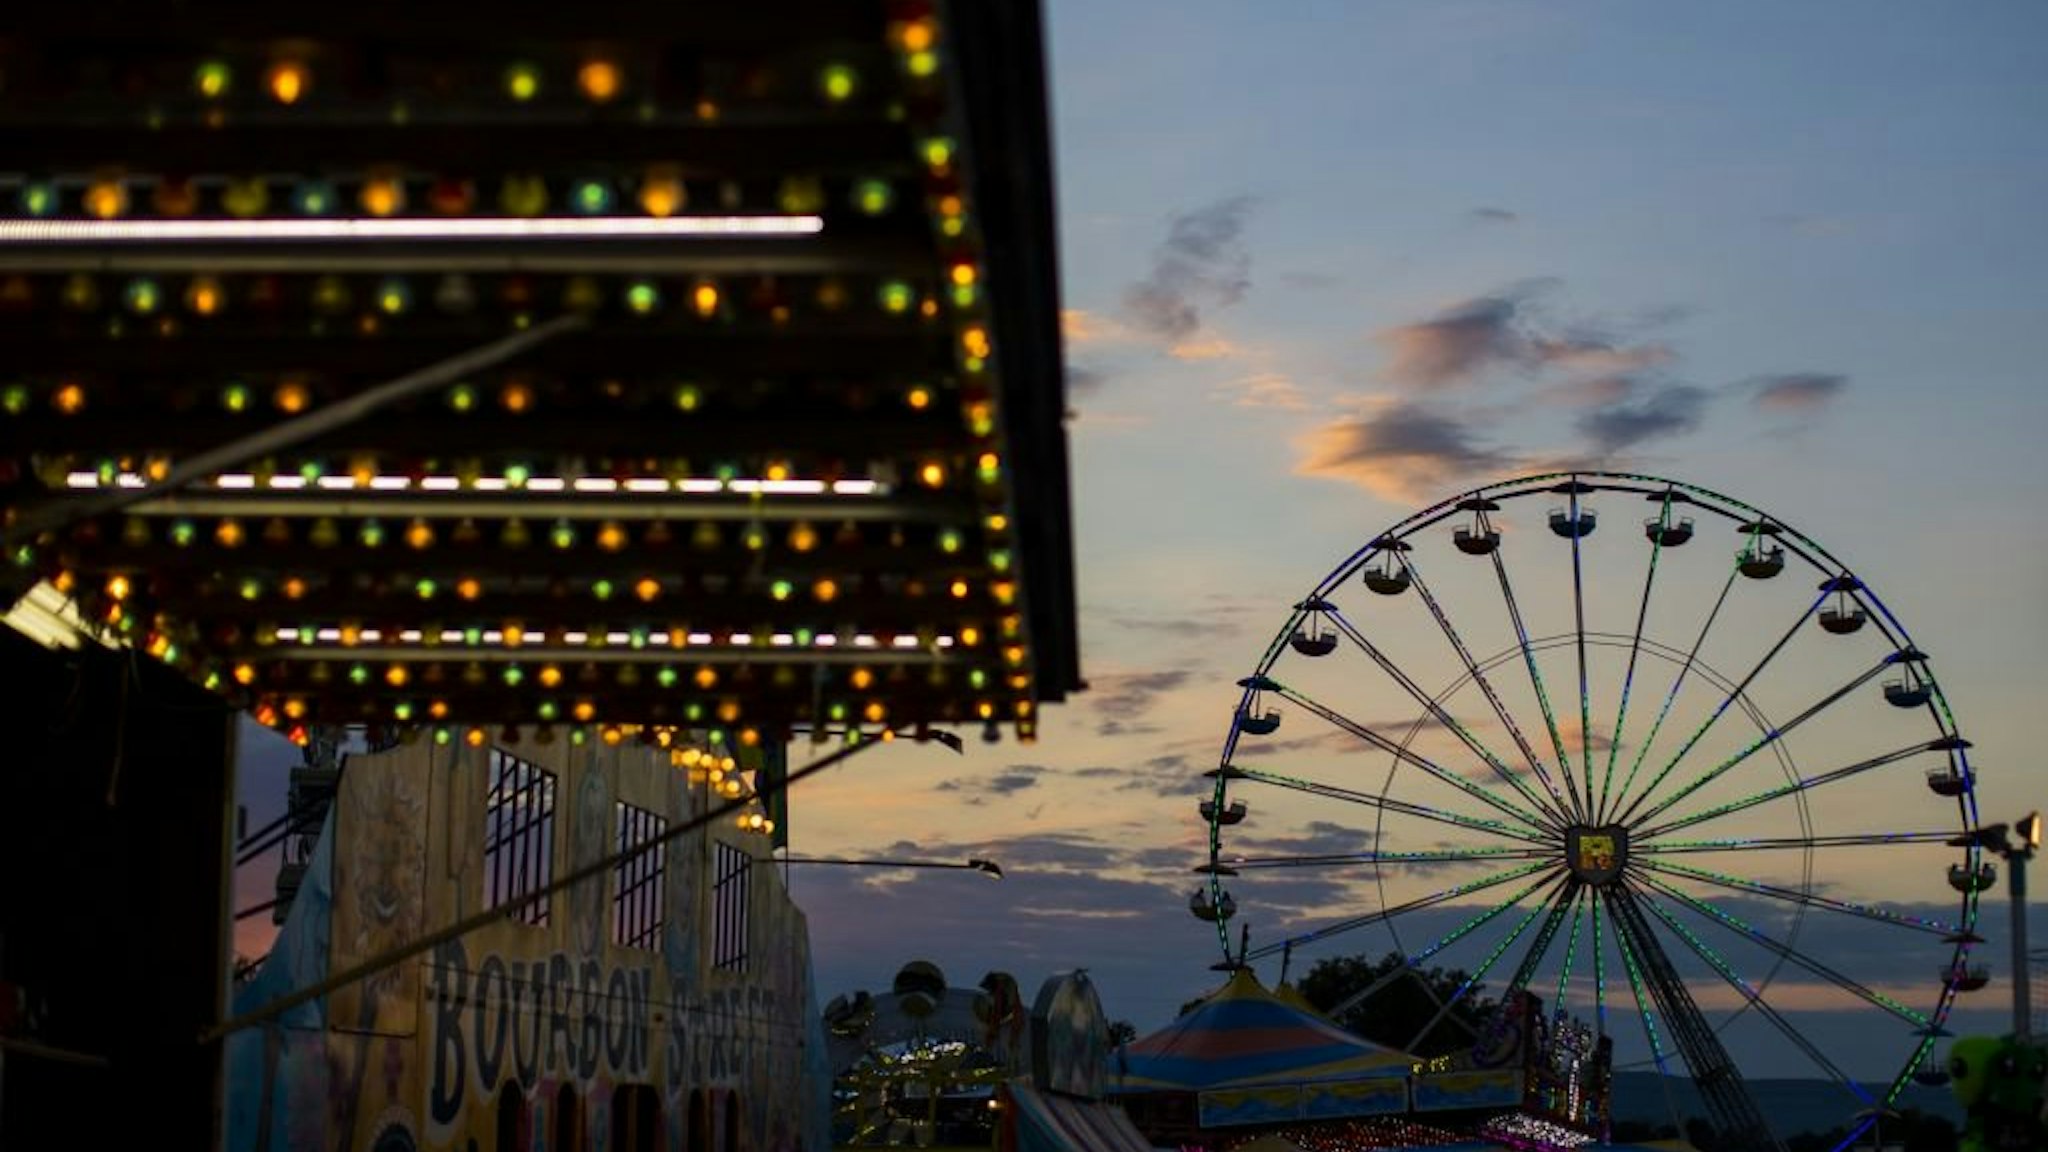 WASHINGTON, USA - SEPTEMBER 15: The sun sets over the amusement rides at The Great Frederick Fair in Frederick, Md., United States on September 15, 2017.